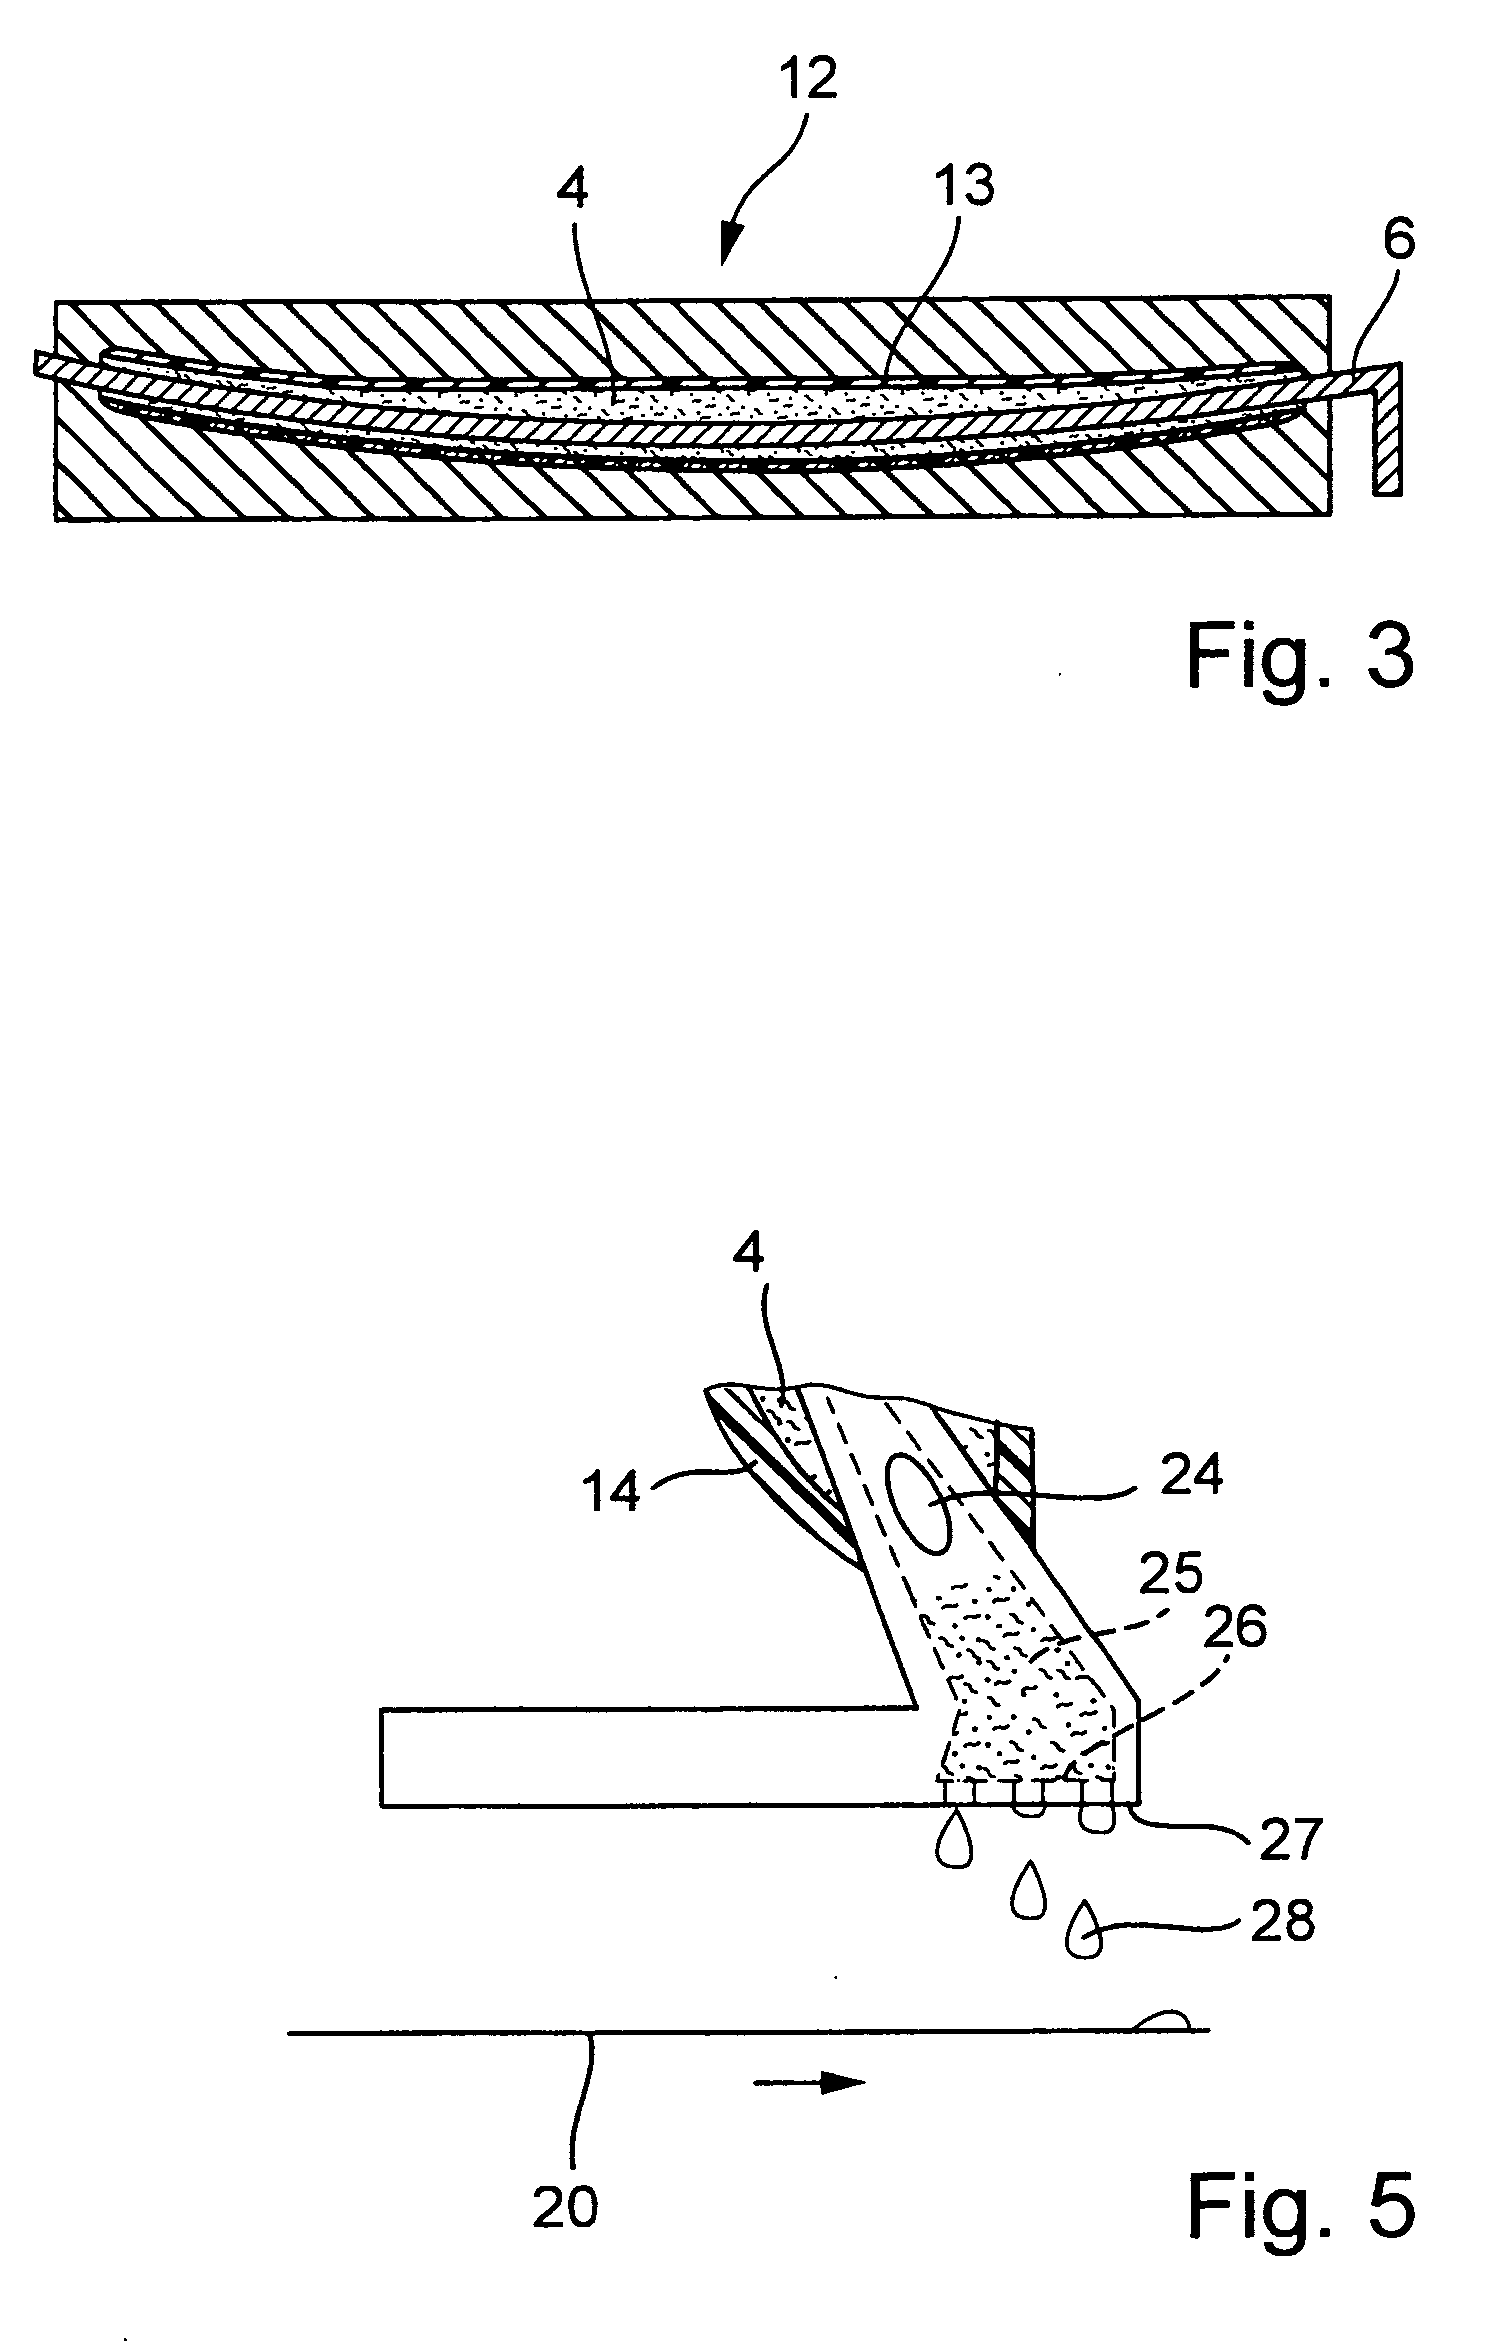 Method for producing a component from fiber composite material